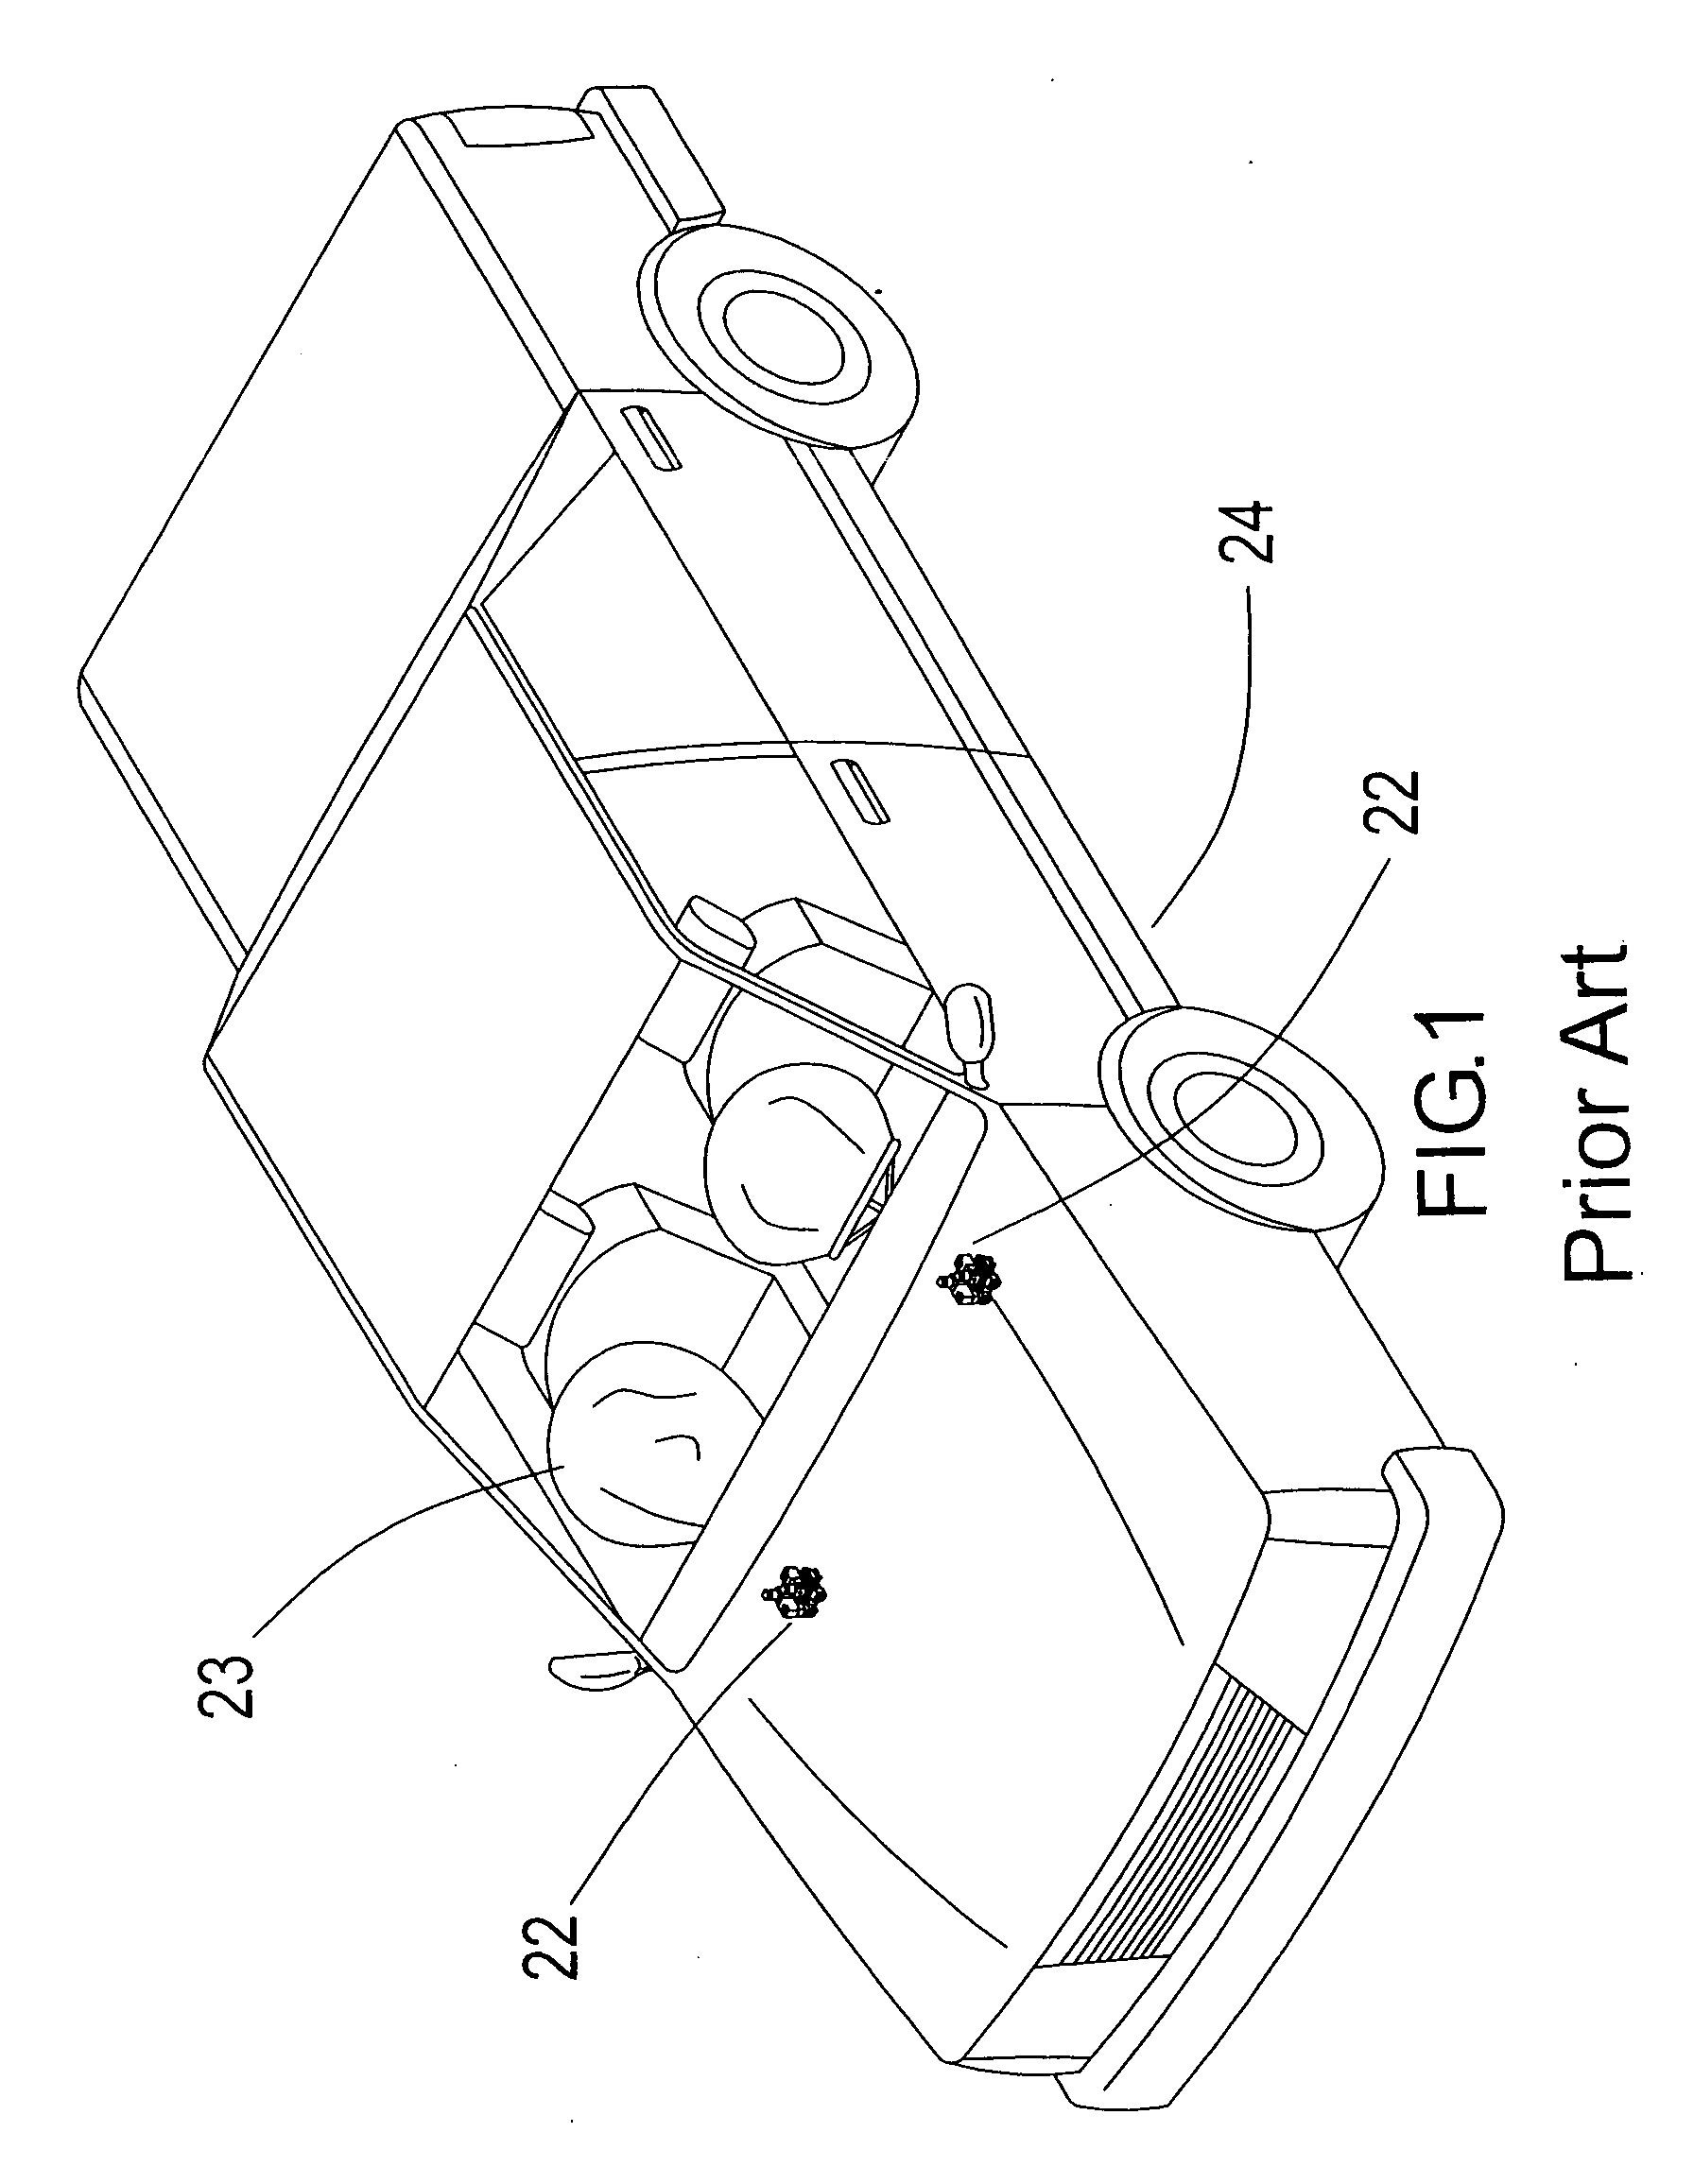 Electromagnetic valve assembly for controlling airbag